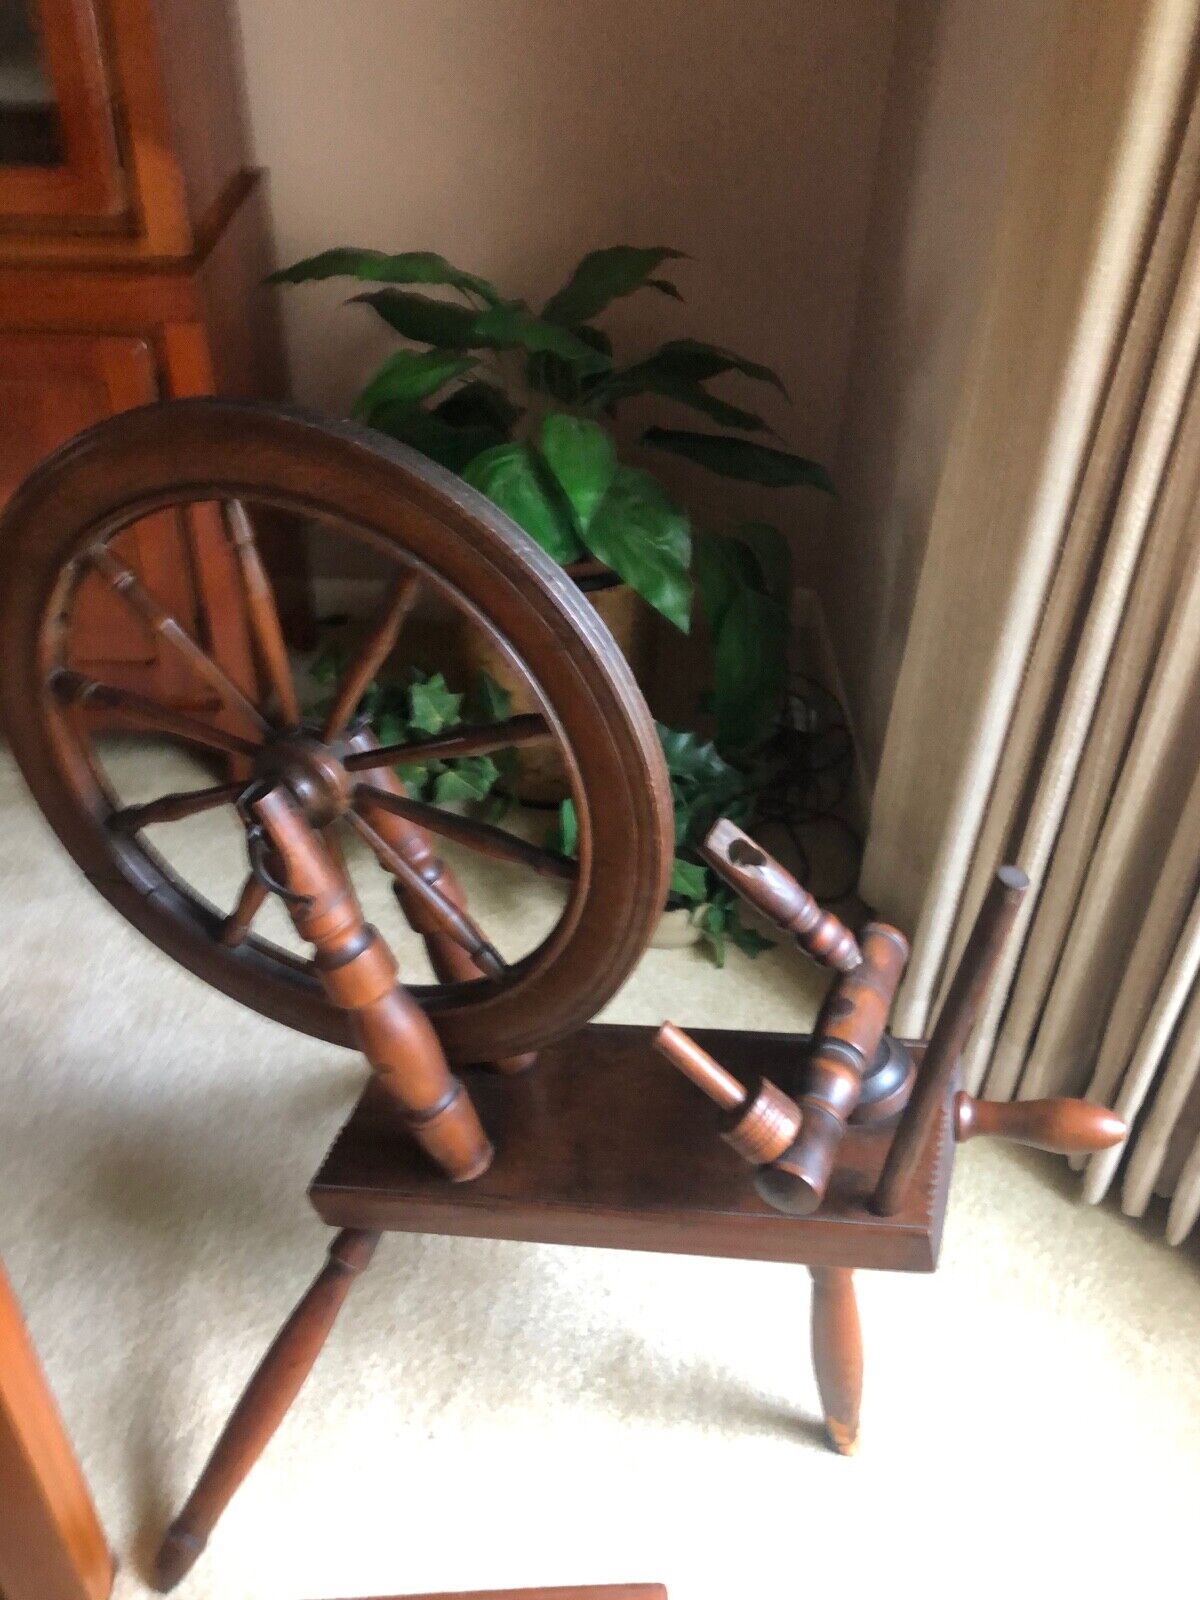 Antique Spinning Wheel, Complete With Yarn Winder, Wheel Is 19.25